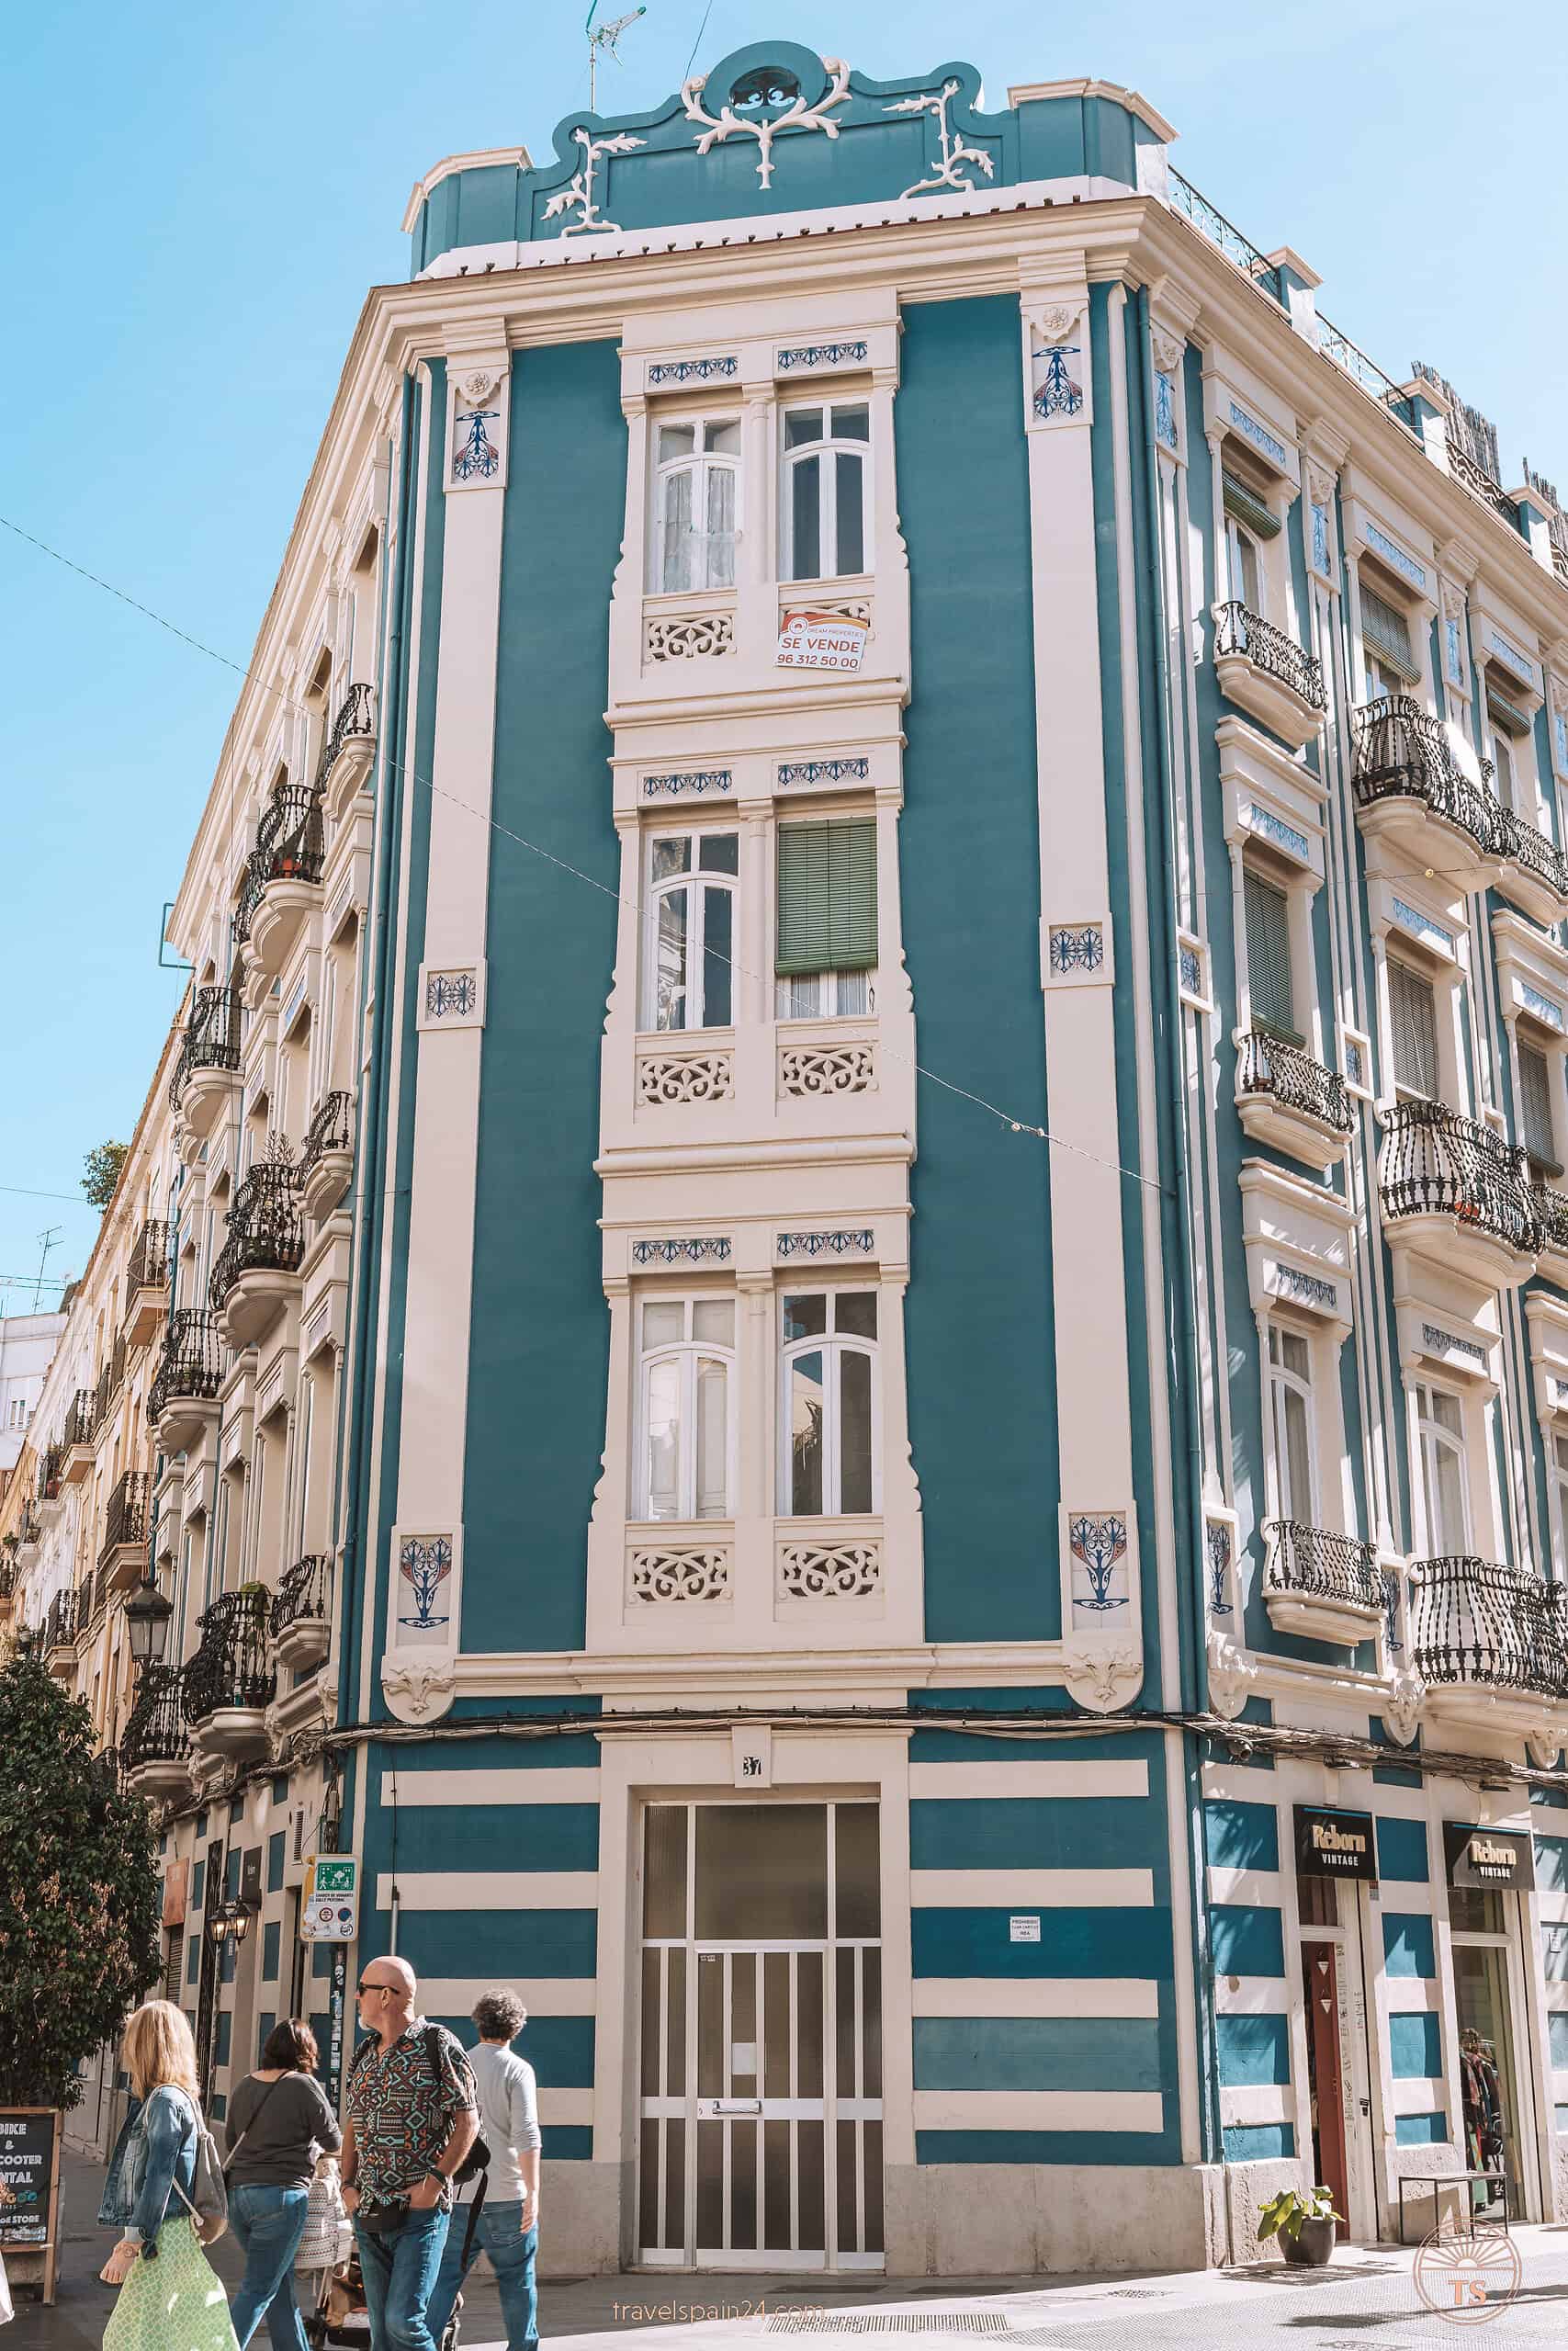 A beautiful blue building with white balconies in the Russafa district of Valencia, displaying the vibrant and colorful architecture that makes the area a must-visit.